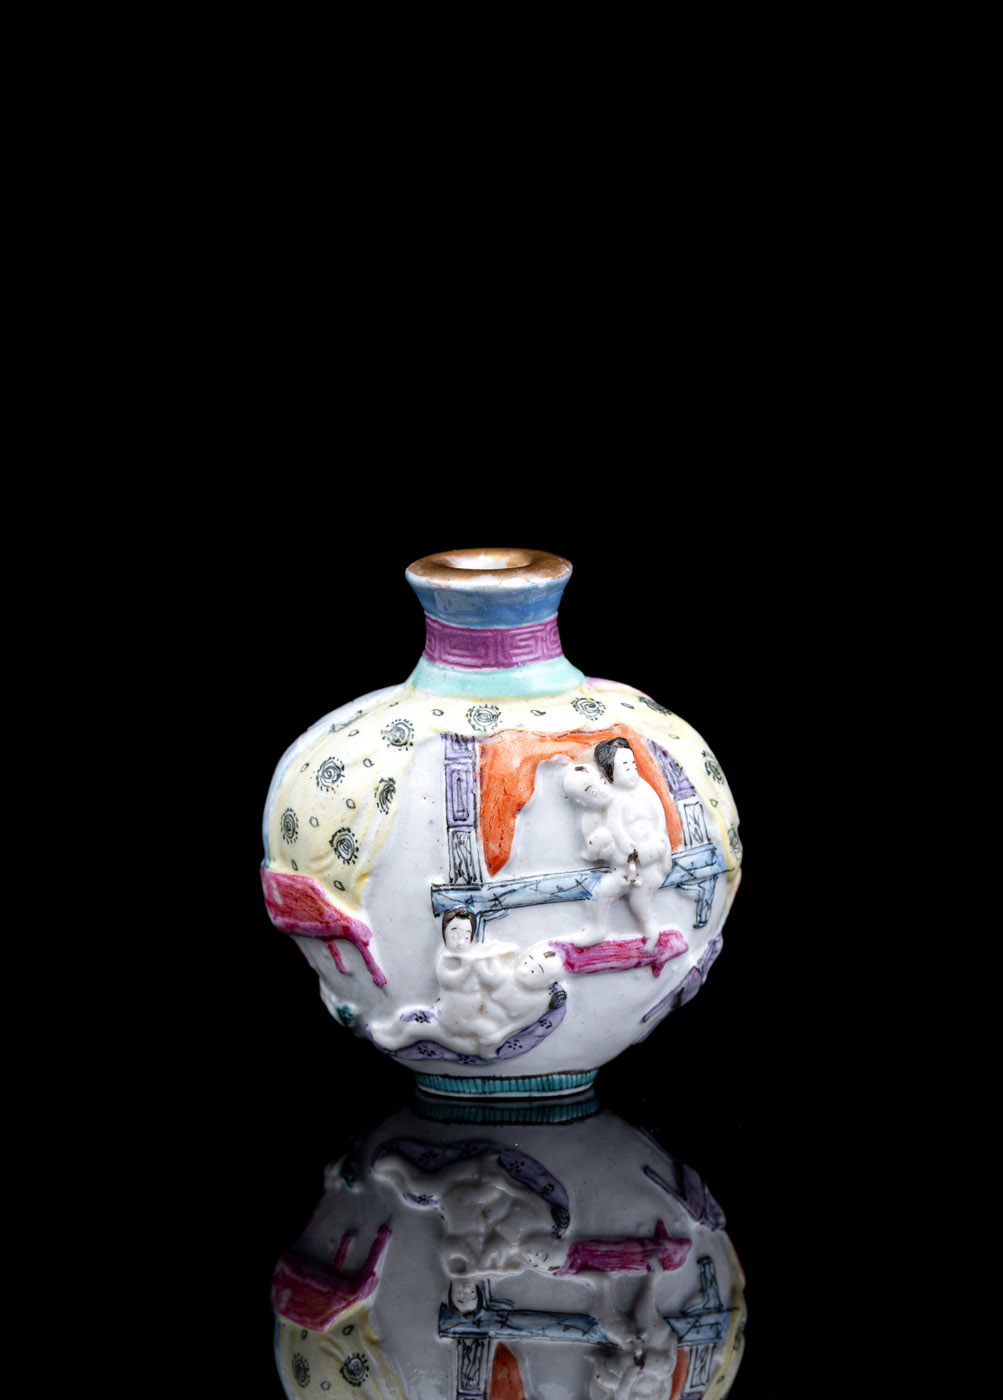 <b>A FAMILLE ROSE MOLDED BISCUIT PORCELAIN SNUFFBOTTLE WITH EROTIC SCENES</b>